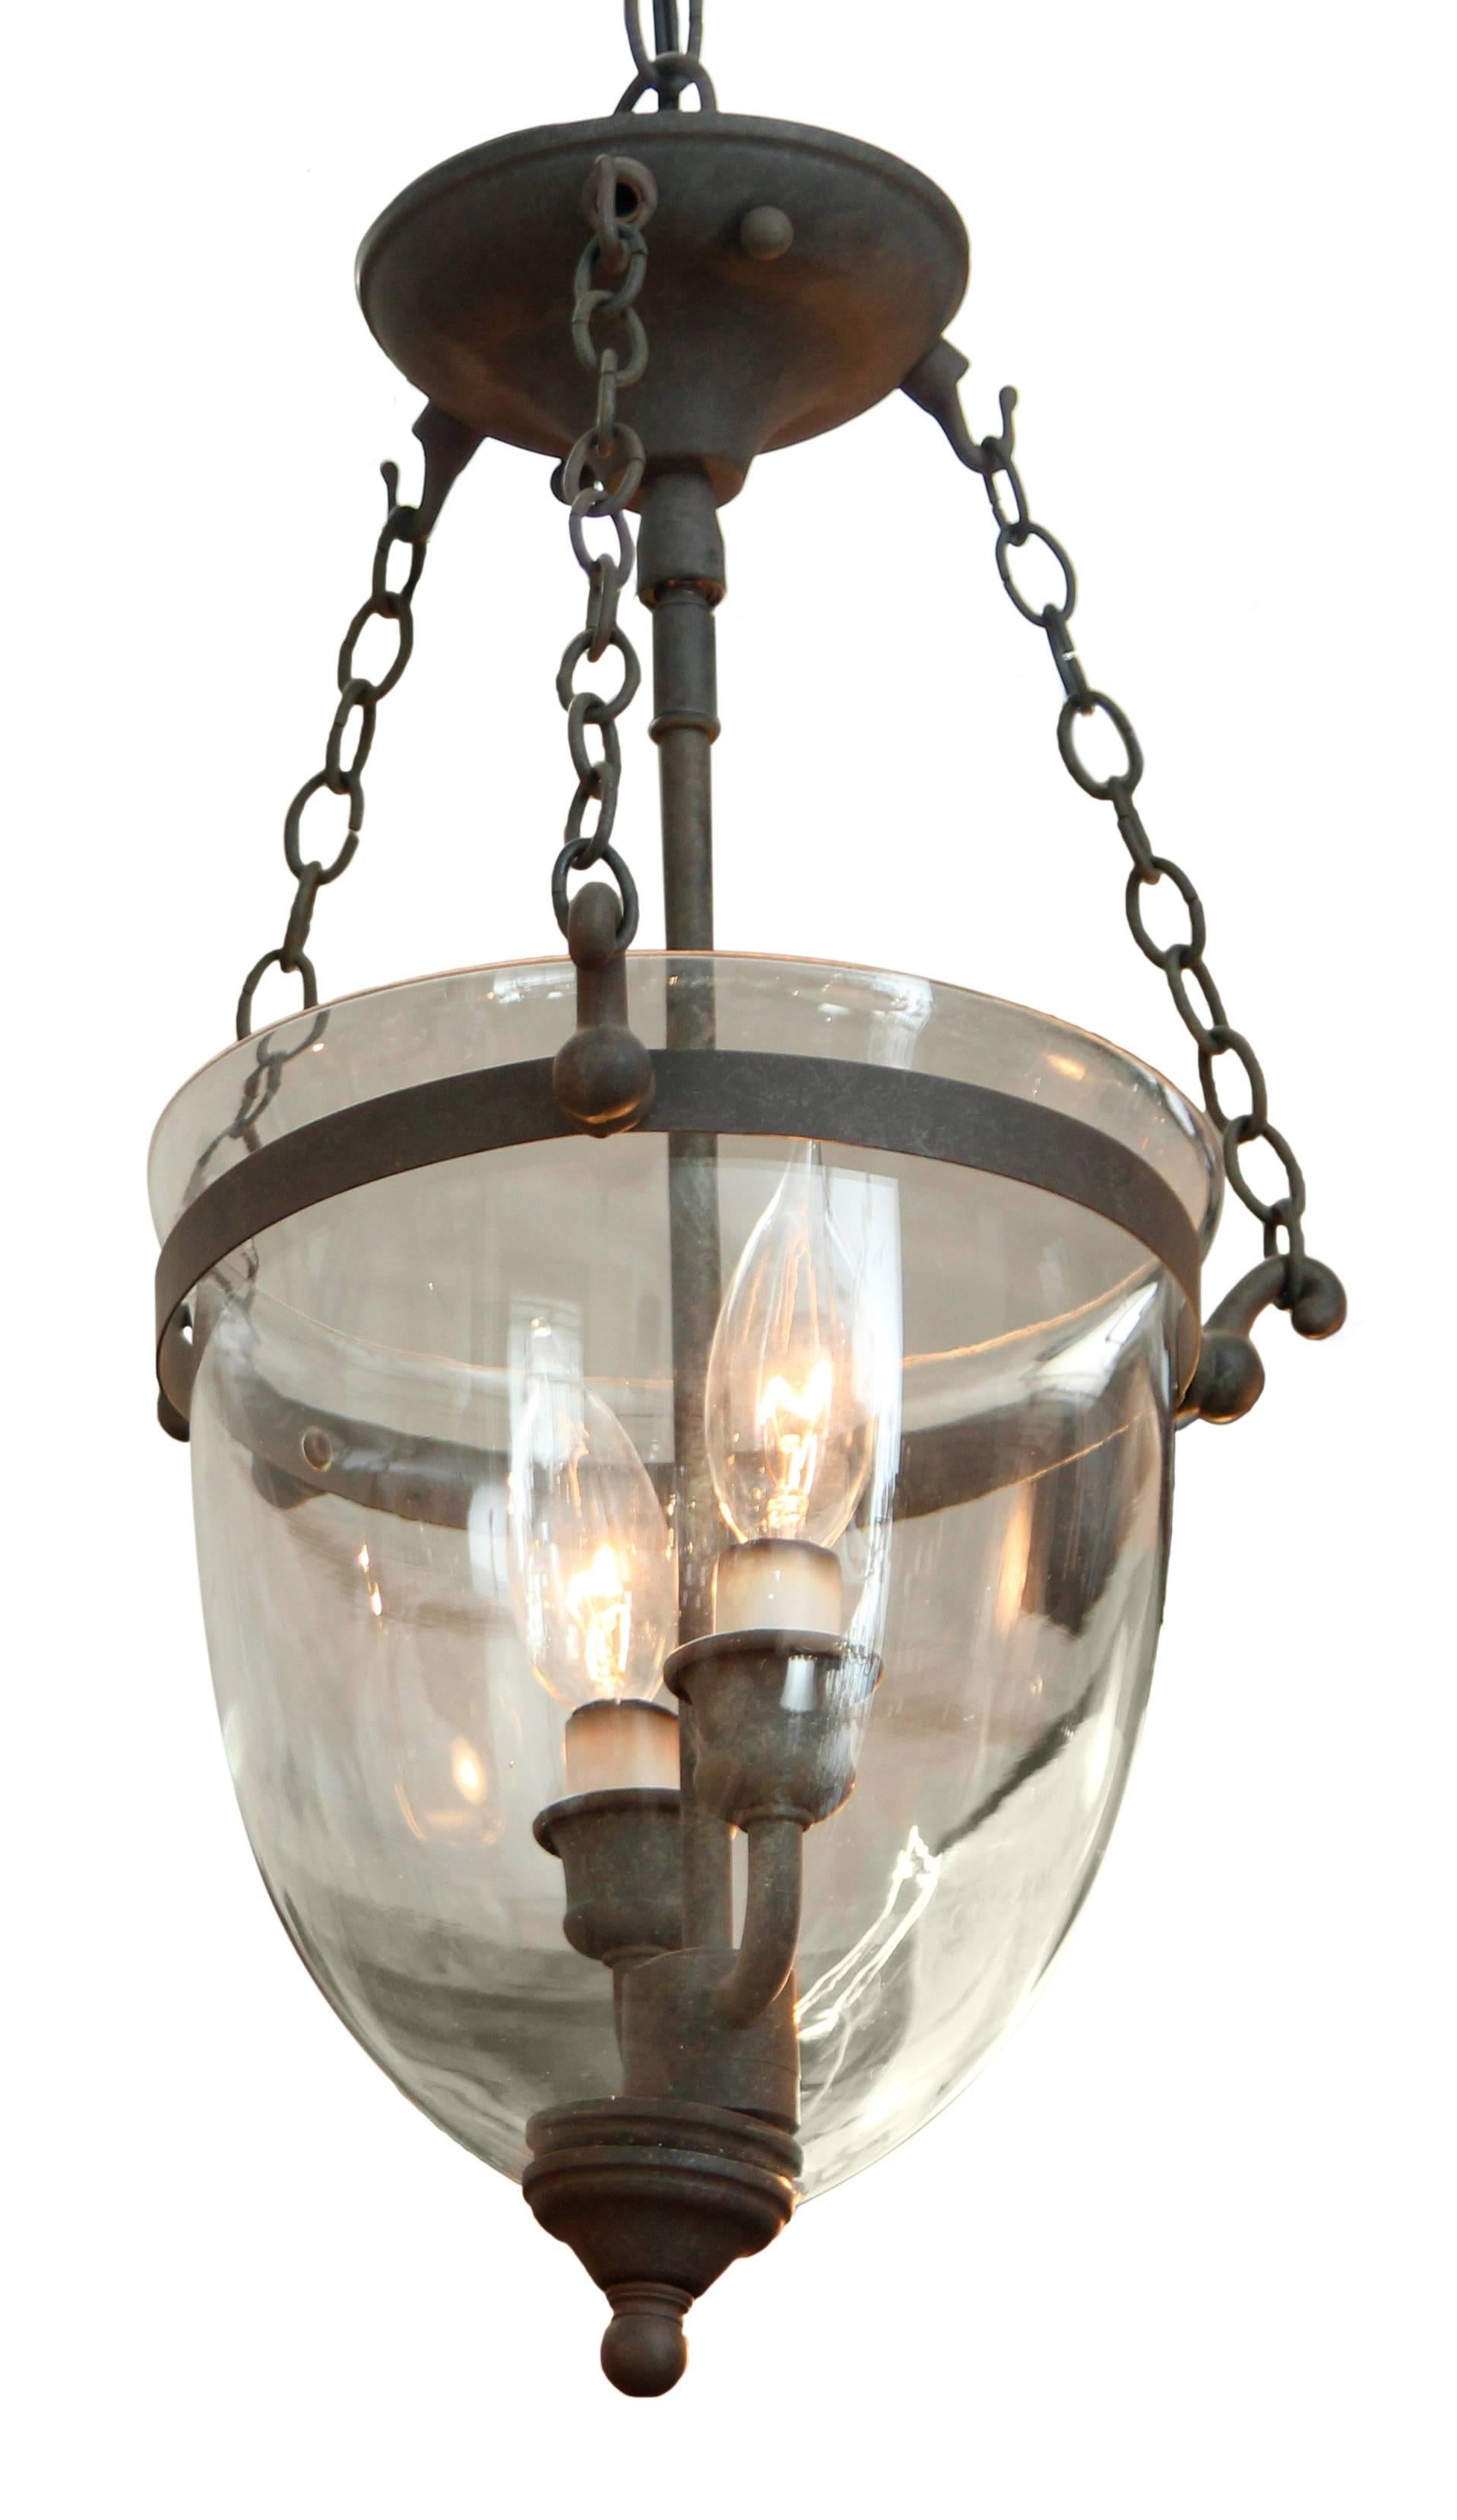 1930s bell jar pendant light. Features a dark bronze finish. Requires two bulbs. This item can be viewed at our 5 East 16th St, Union Square location in Manhattan.